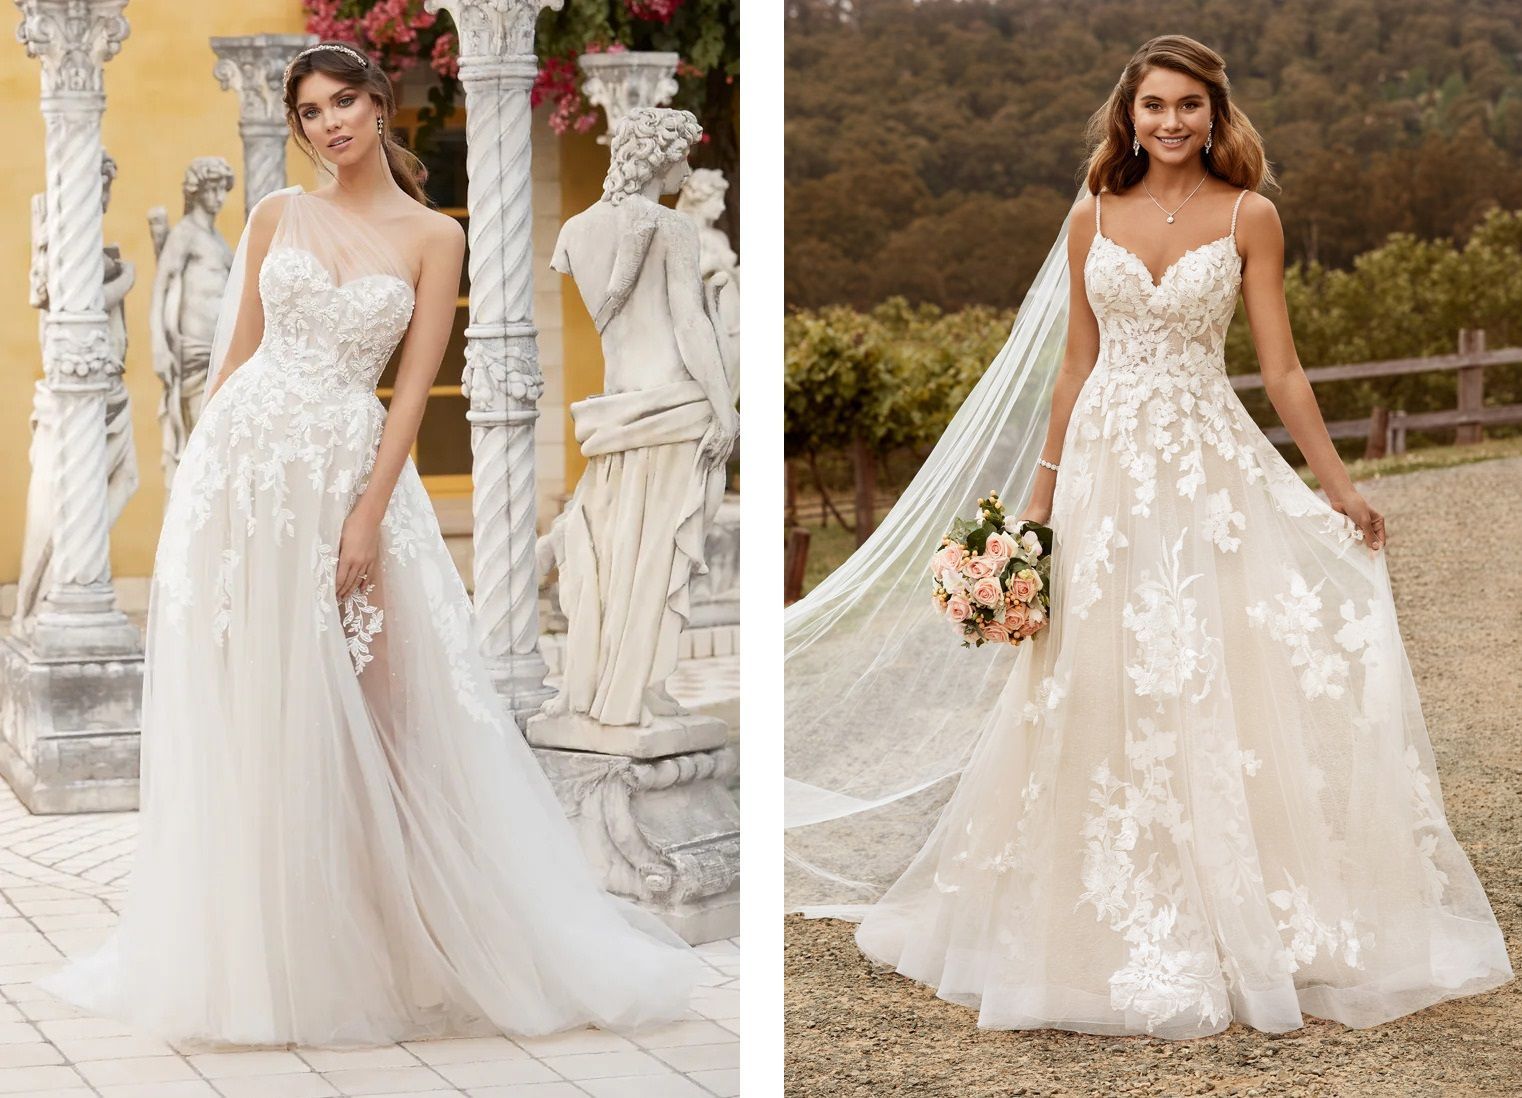 Two wedding dress designs from Angela Bianca collection